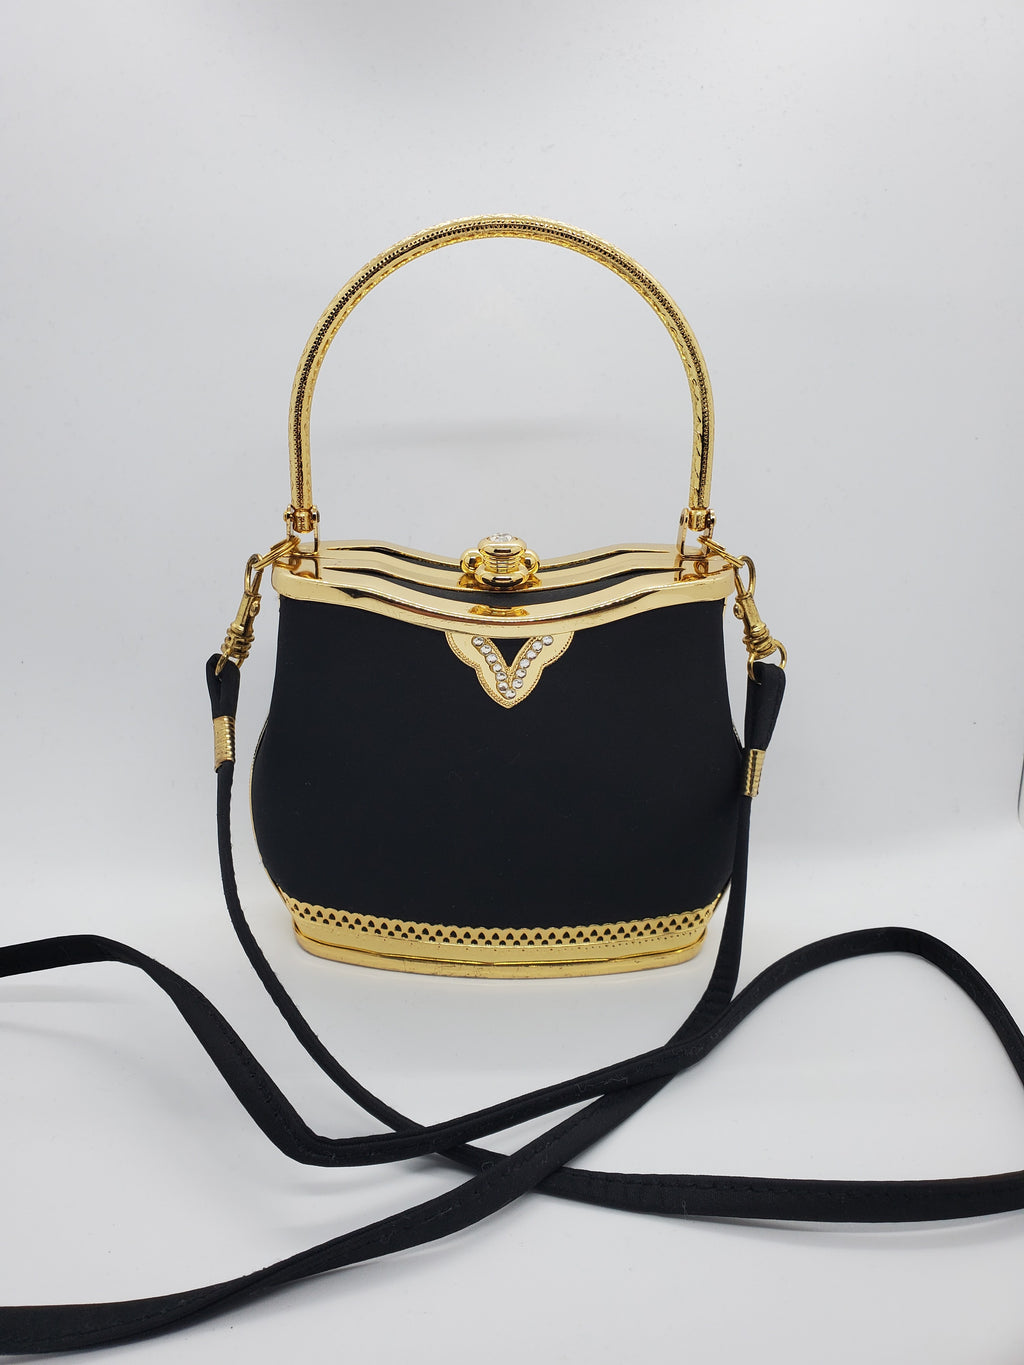 Front view of Smooth black handbag with ornate gold frame and handle with rhinestone accents and crossbody strap